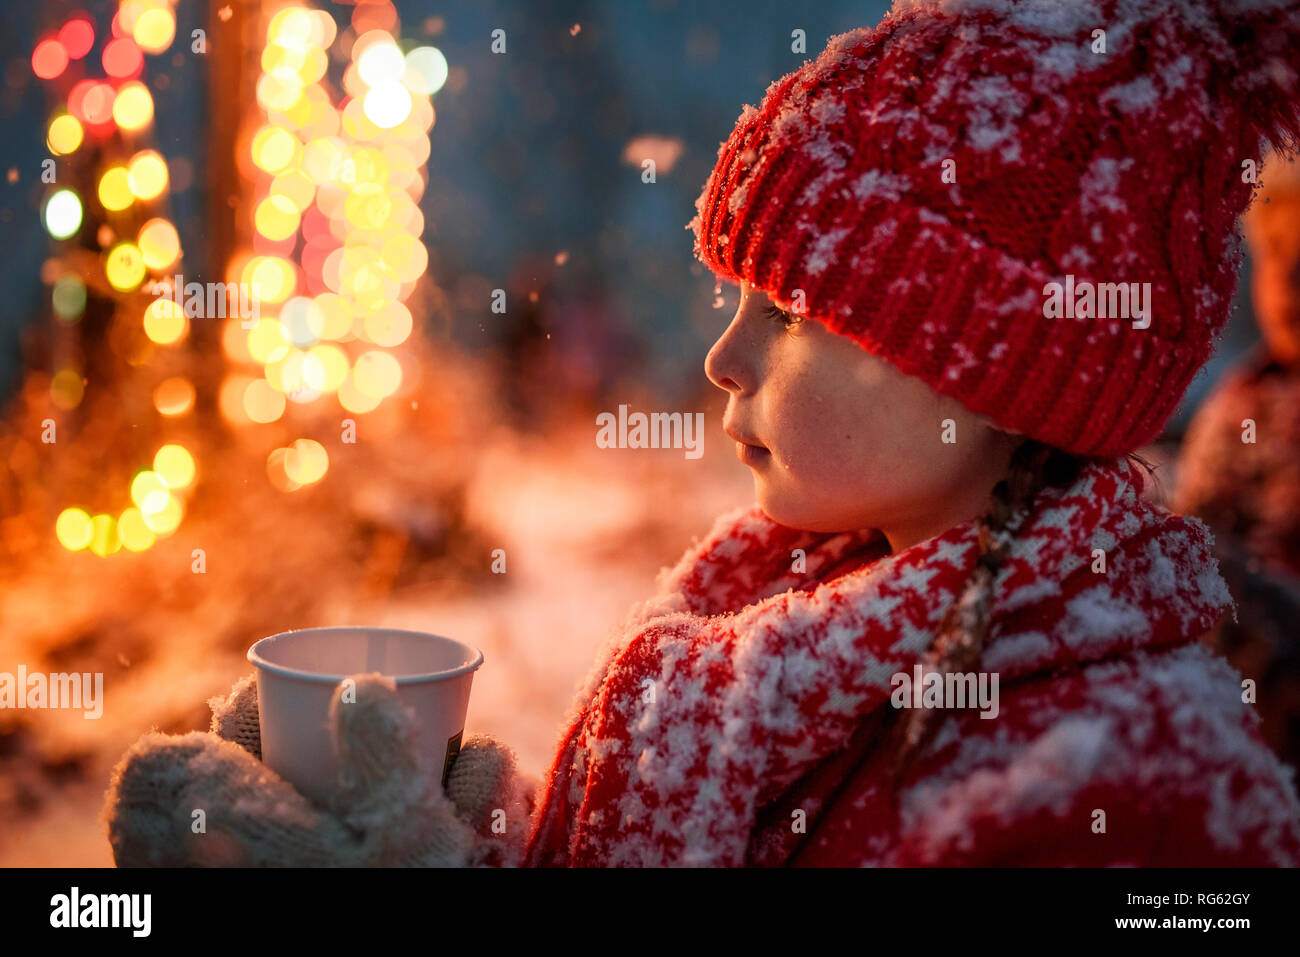 Girl standing outdoors holding a hot chocolate drink, United States Stock Photo